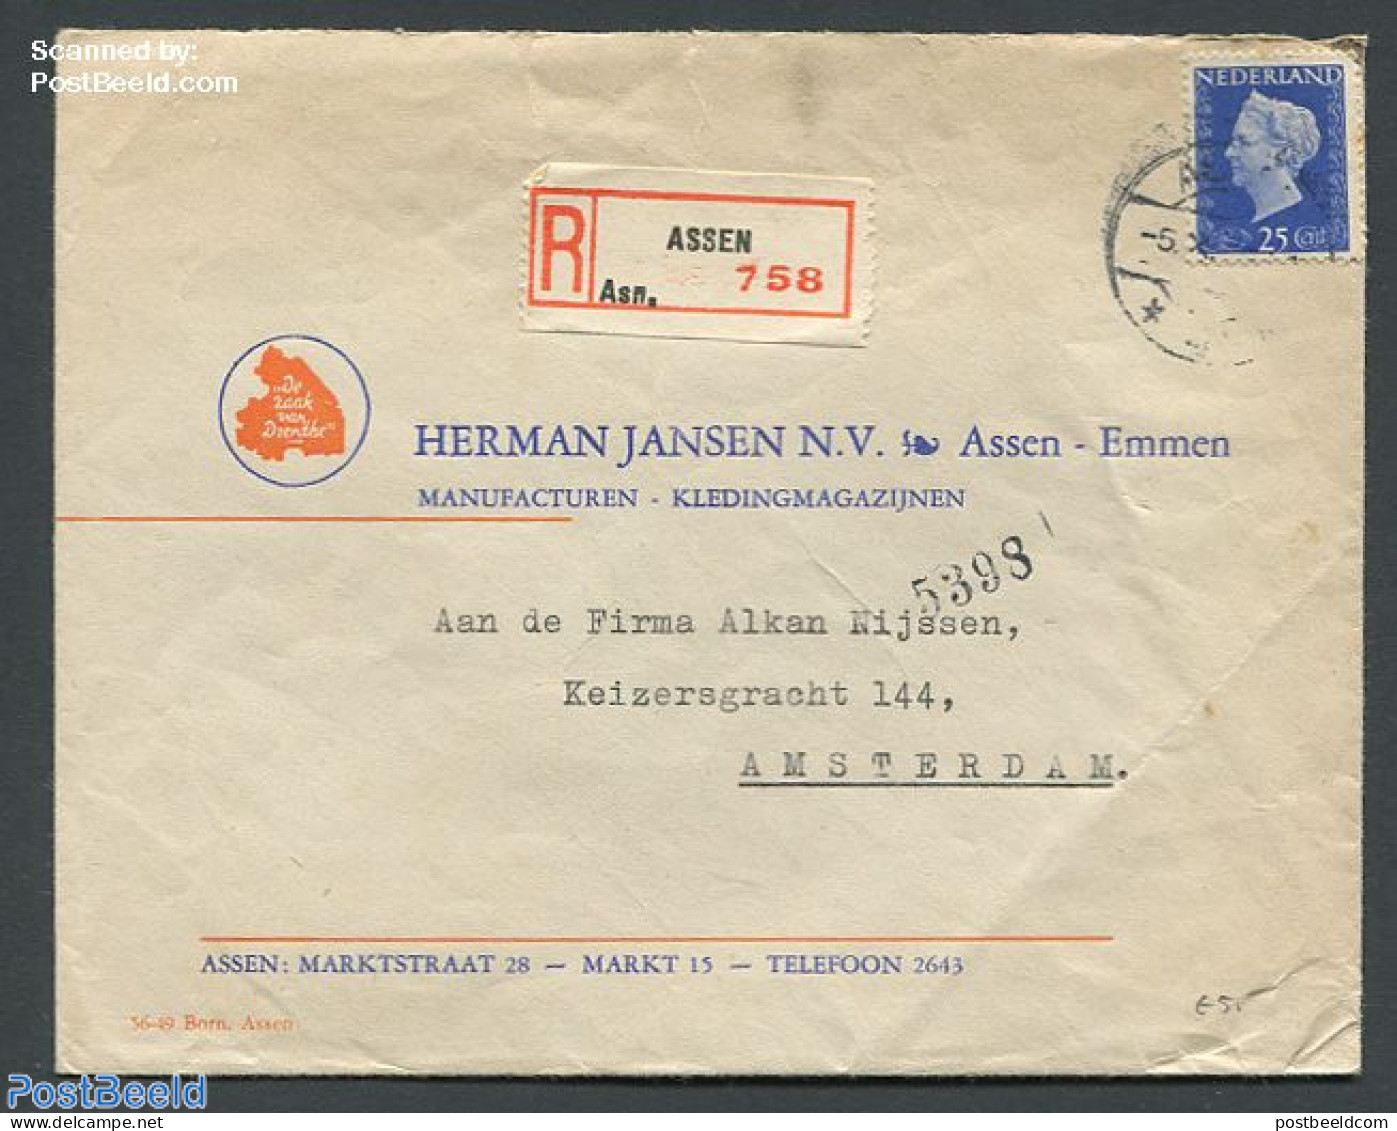 Netherlands 1947 Registered Cover Assen To Amsterdam With Nvhp 483, Postal History, History - Kings & Queens (Royalty) - Lettres & Documents